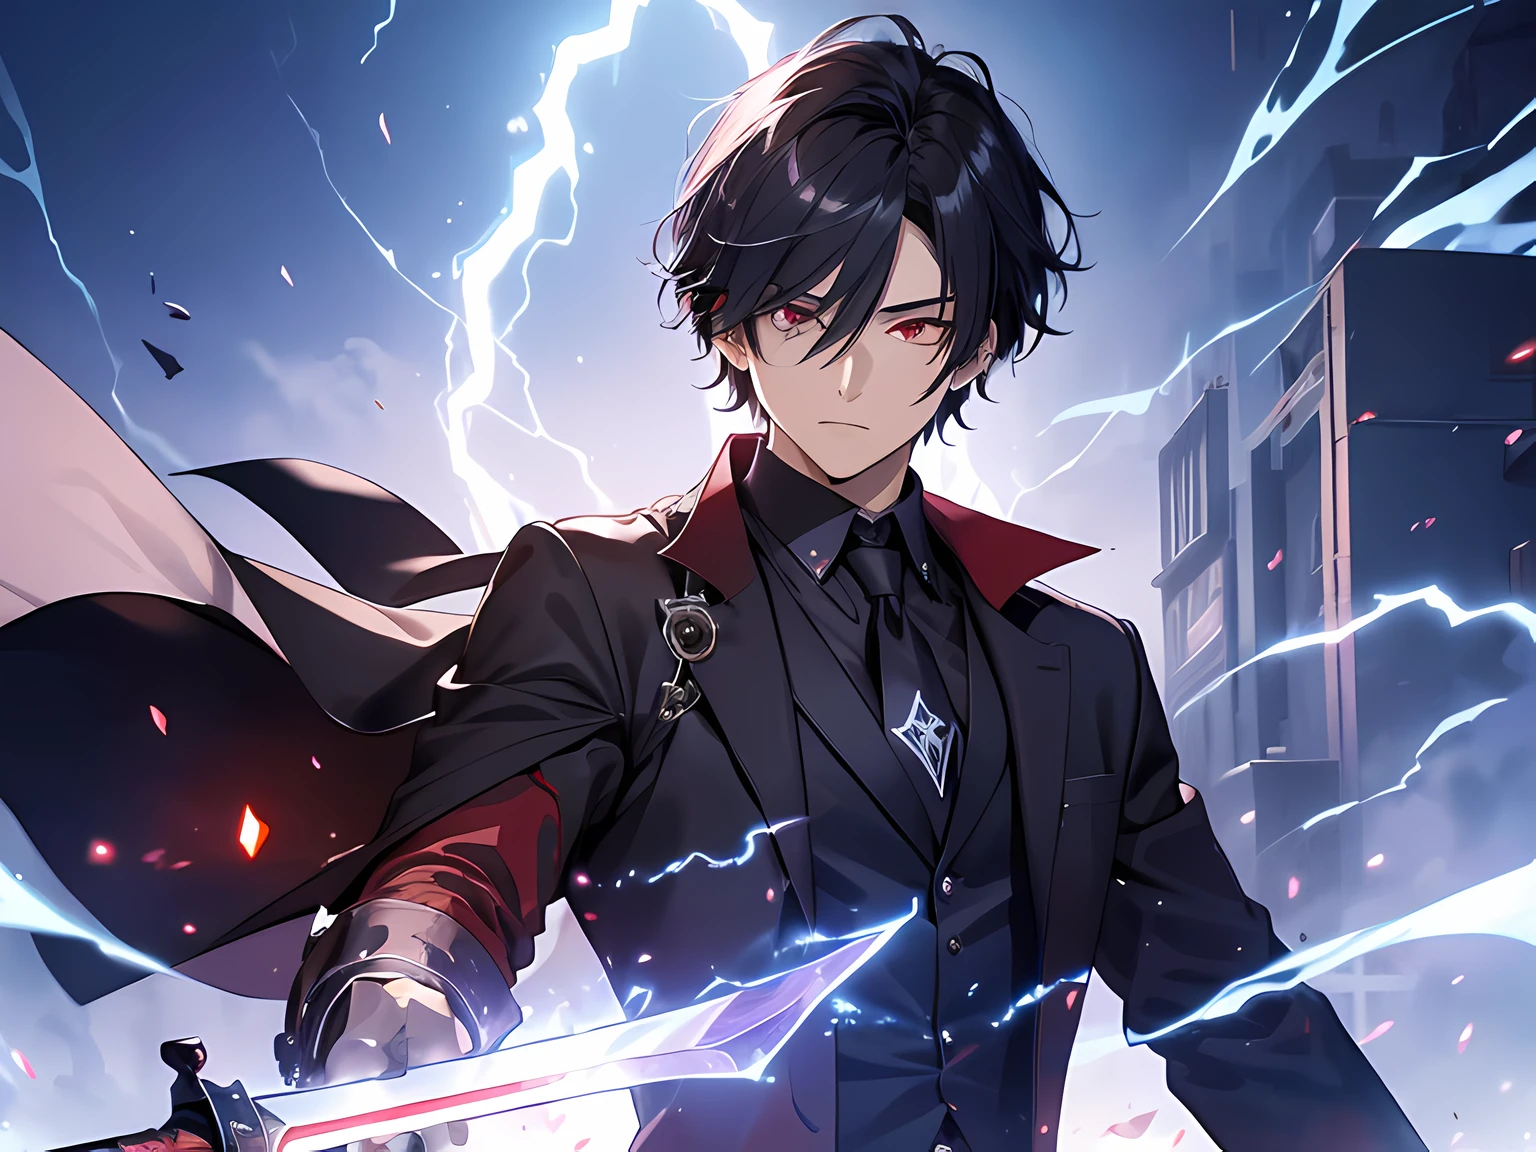 (ultra-detailed, perfect pixel, highres, best quality, beautiful eyes finely detailed), 19 years old anime boy, short raven hair, wavy hair, parted bangs, gray hair, gradient hair color, there is many blue lightning swirling around his body (transparent), showing his over power aura (dangerous and terry aura), dangerous, he holding a magical sword, magus, red eyes, long black coat, black shirt, ((neckwear, long tie)), black skirt, aristocrat, noble attire, beautiful, ethereal, elegant, prestigious, realistic fire, the background is full of magical particles and realistic blue fire. Ray tracing.